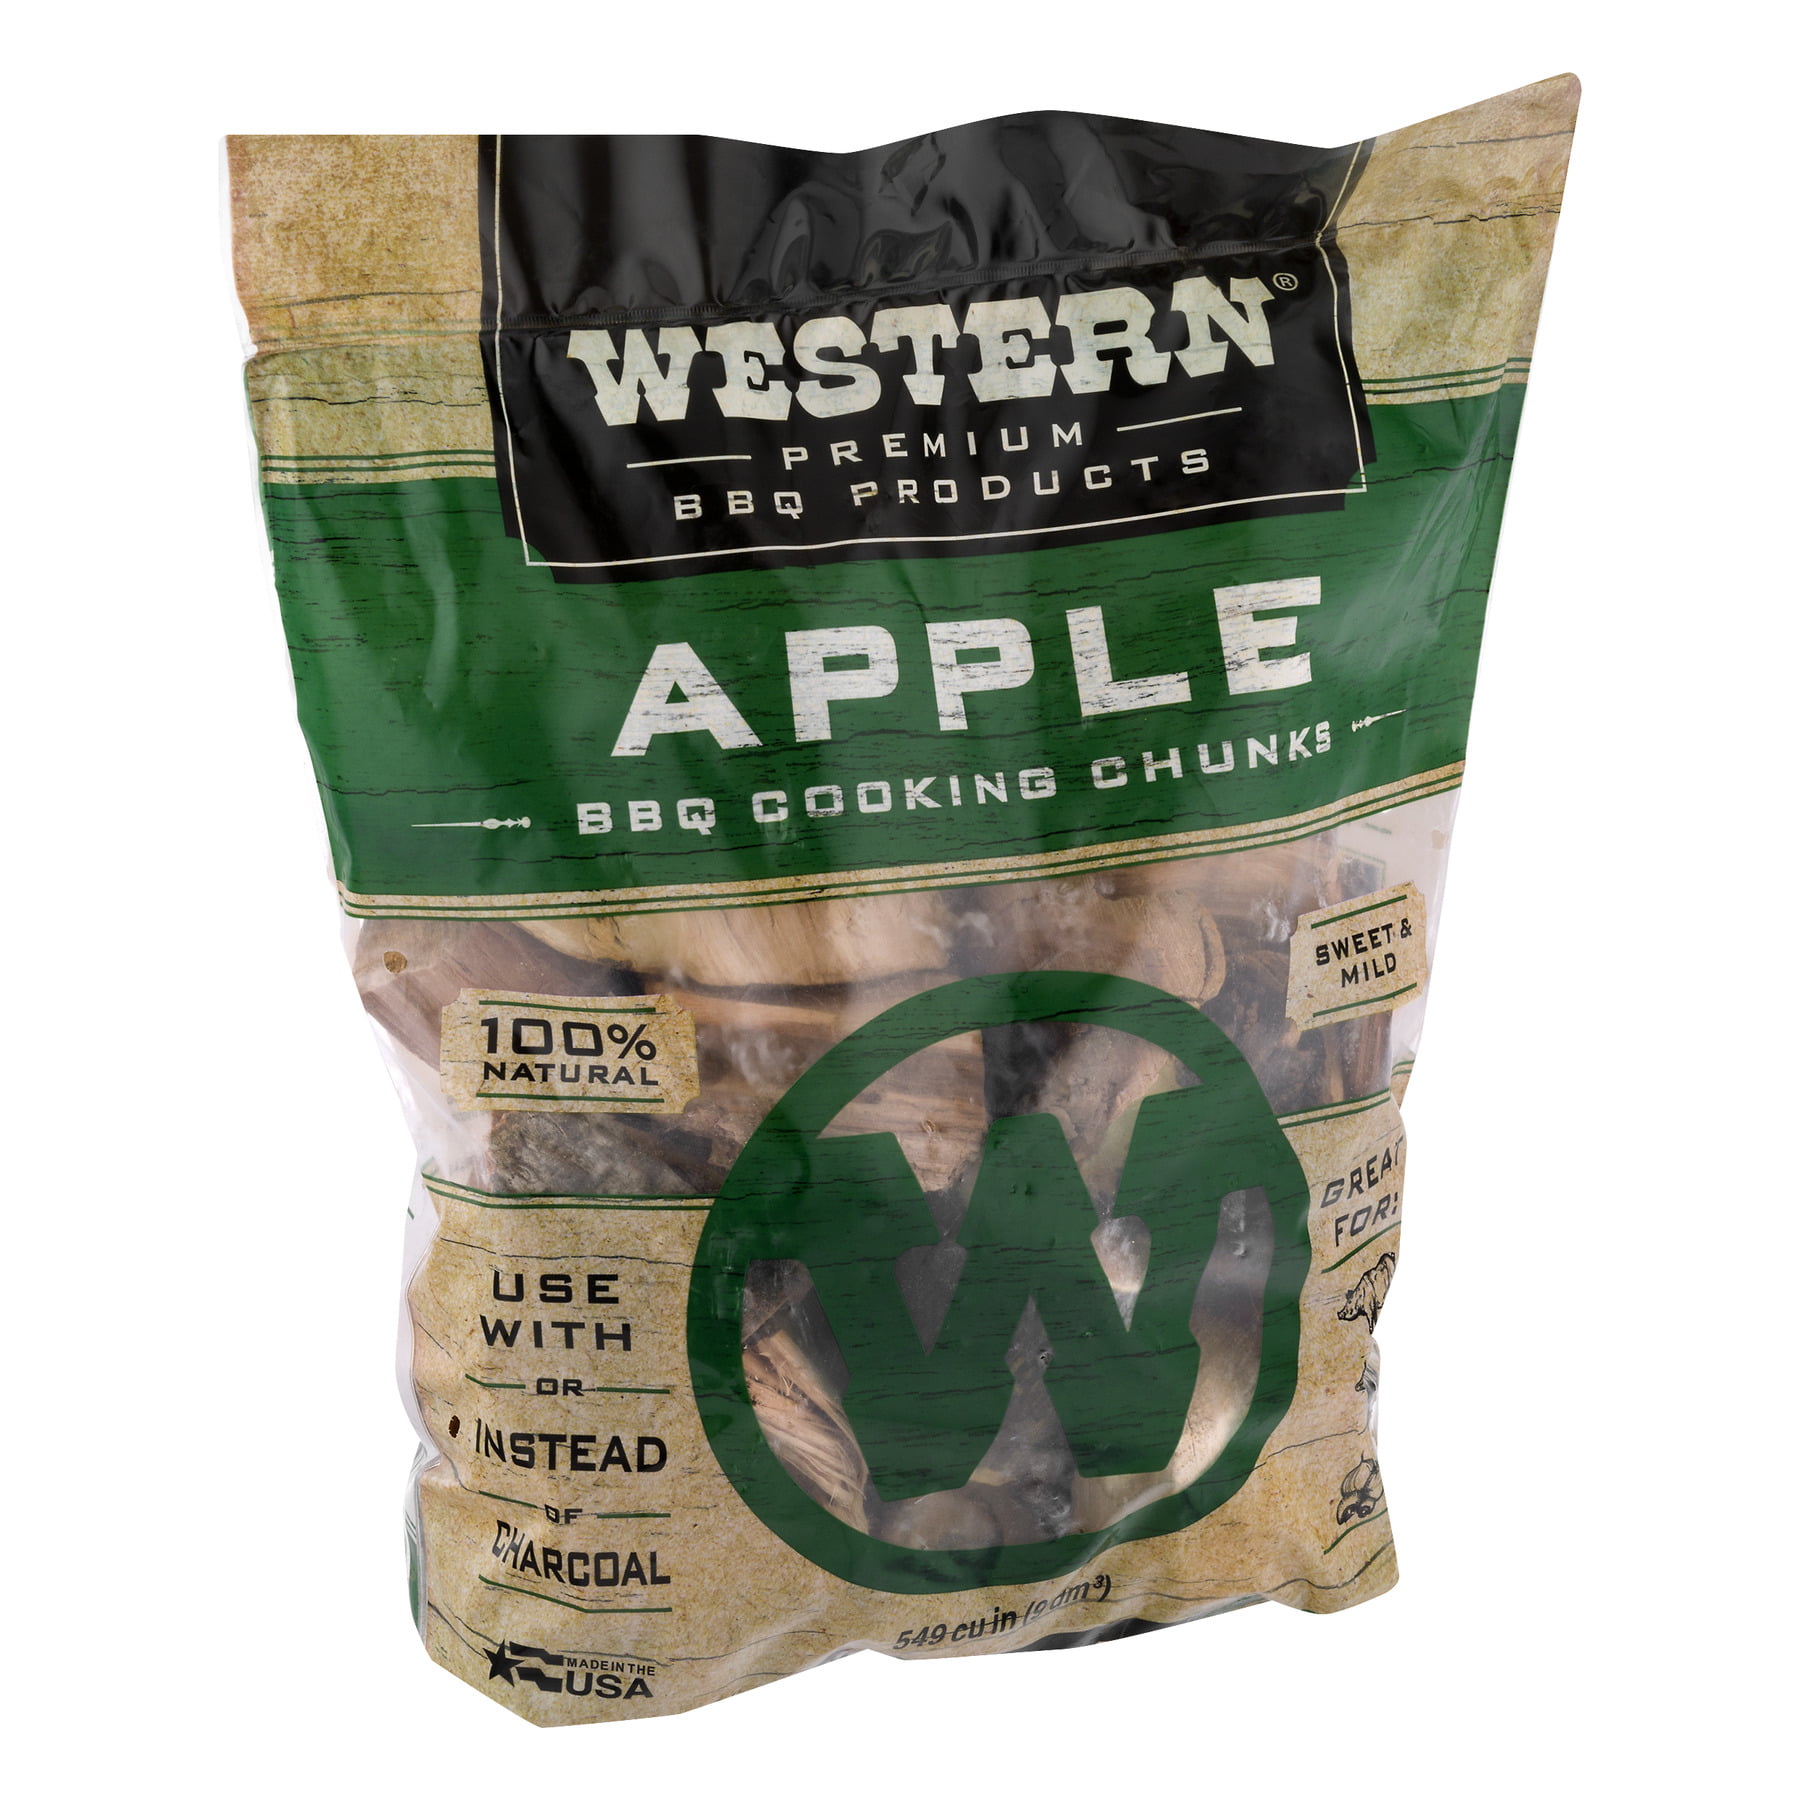 Apple BBQ Cooking Chunks for Western Premium Pizza